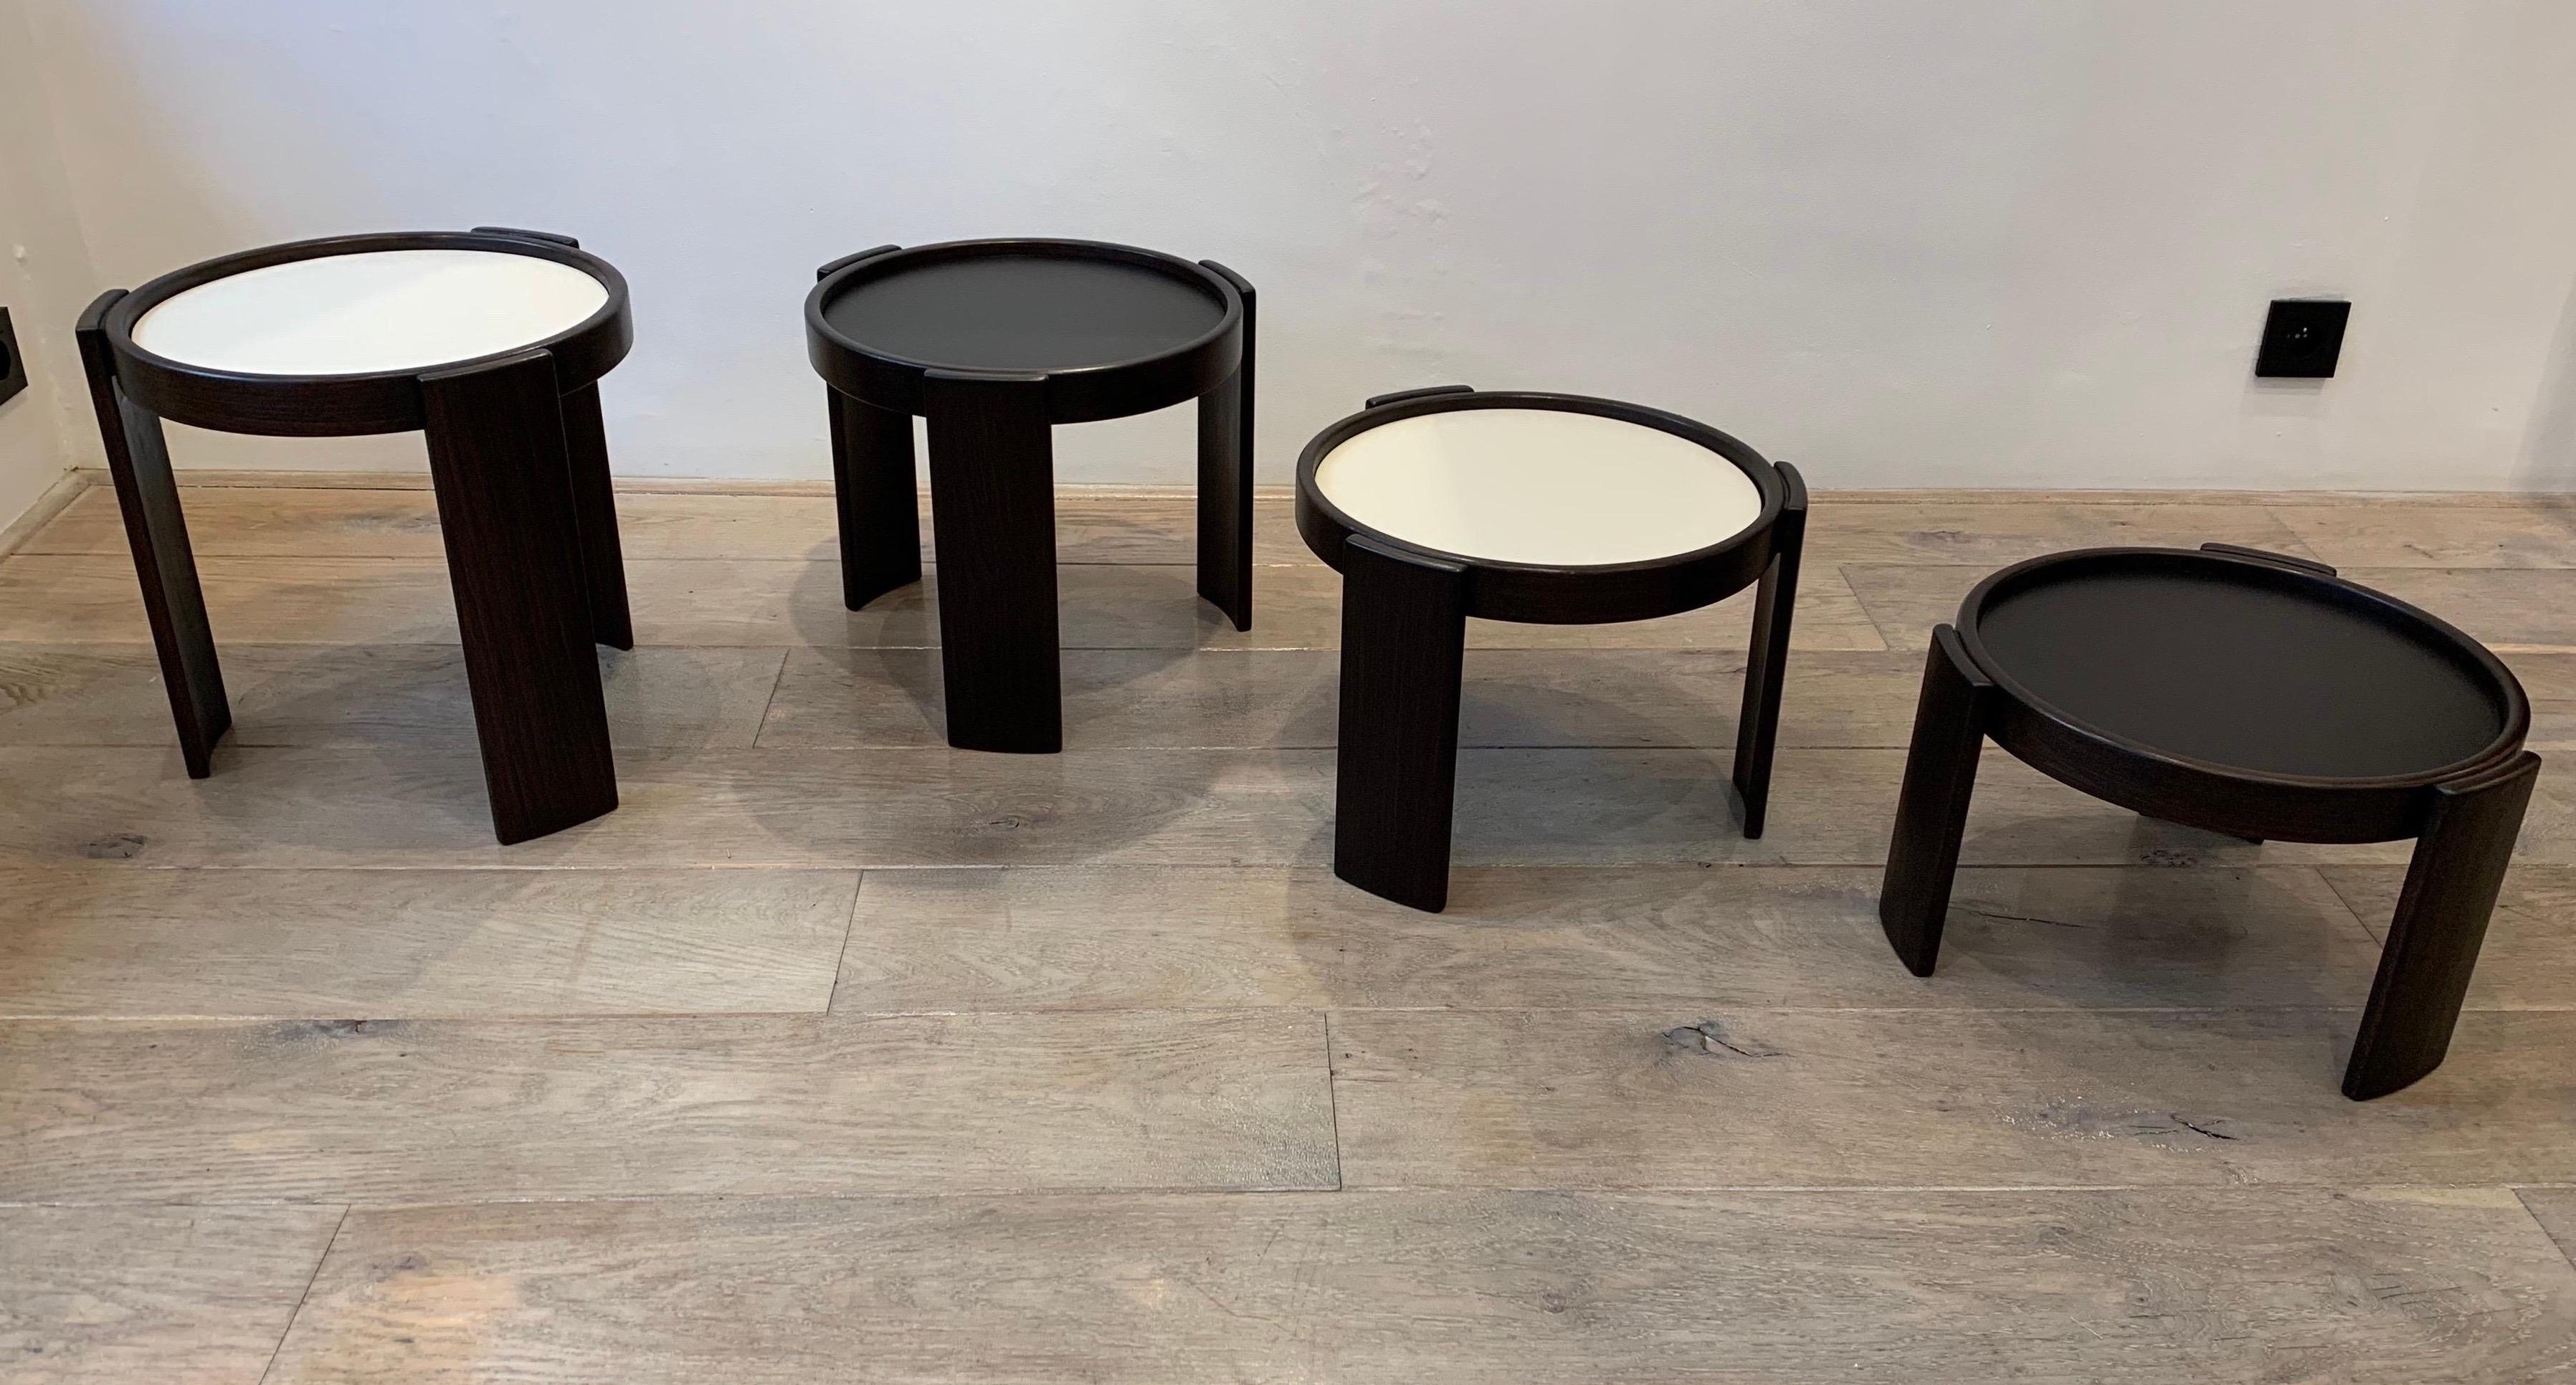 This elegant set of nesting tables is designed by Gianfranco Frattini. The stacking principle, with elegant simple design combined with interchangeable tops gives a interesting effect that can match in any interiors. The set is an early dating circa